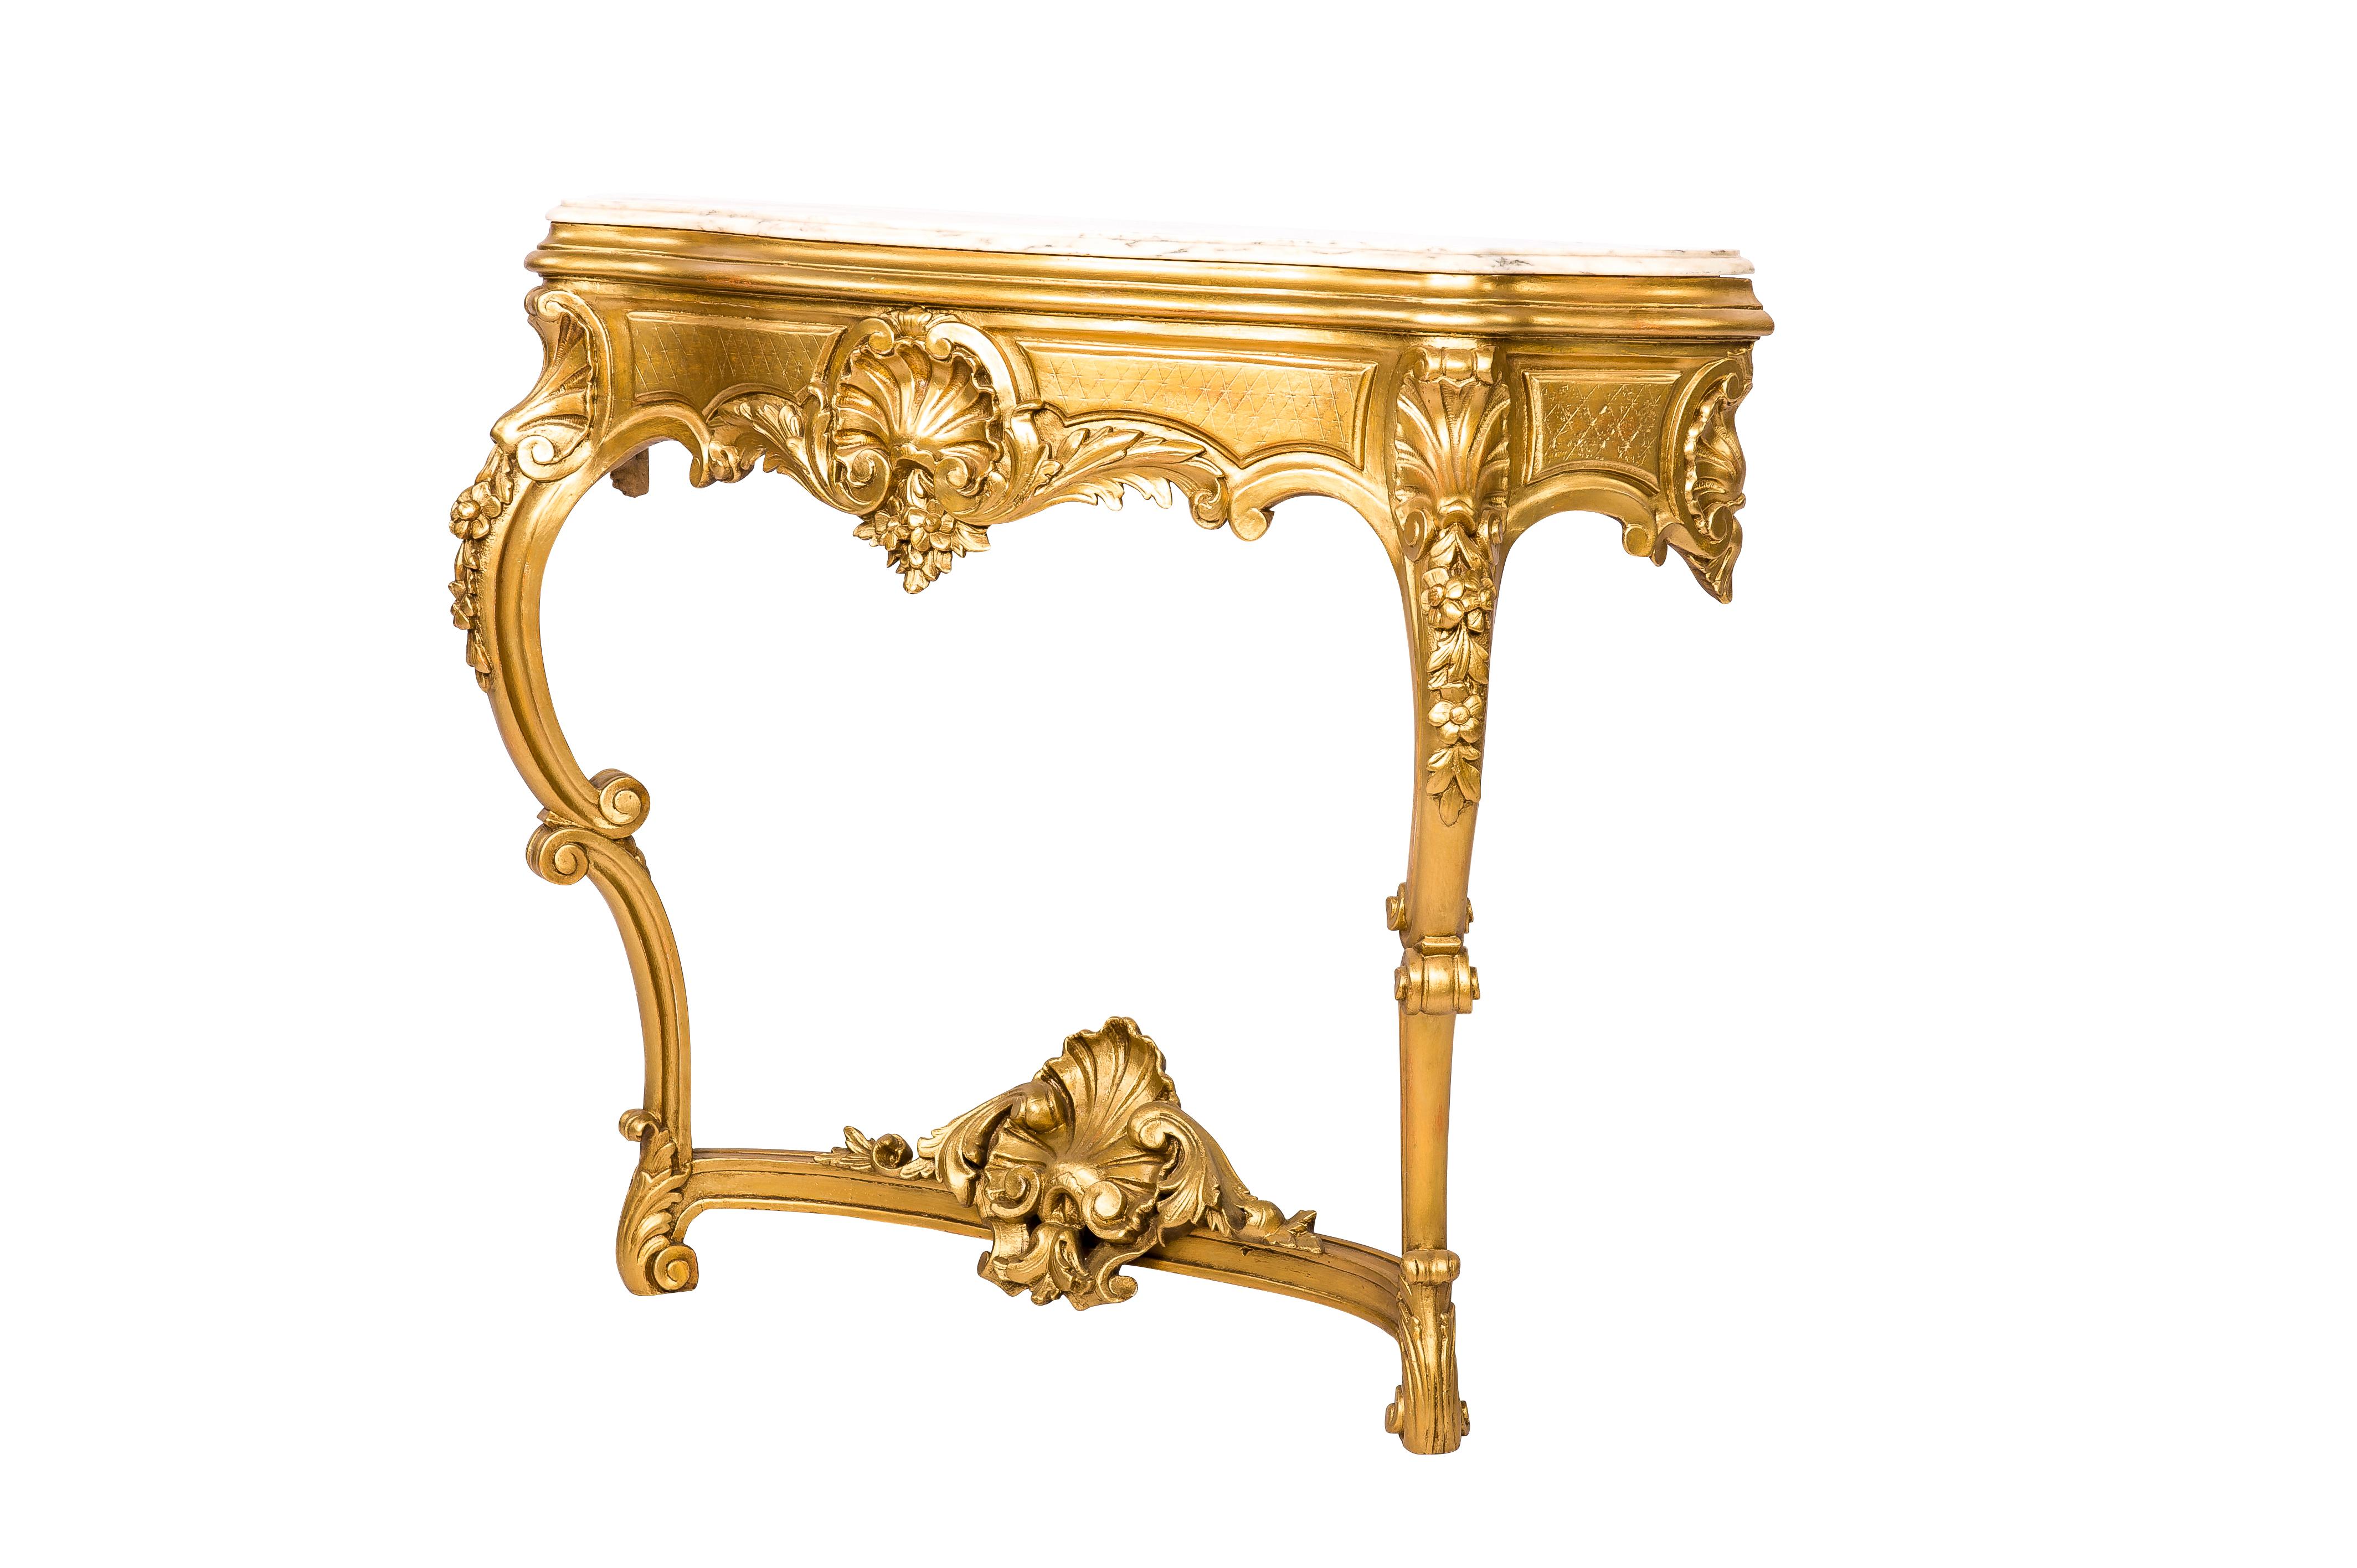 A beautiful late 19th century French hand-carved Rococo console table with a Bianca Rosa marble top. This console table has an elegantly hand-carved skirt with a centered St Jacobs shell flanked by a baroque foliate ornament with complex volute